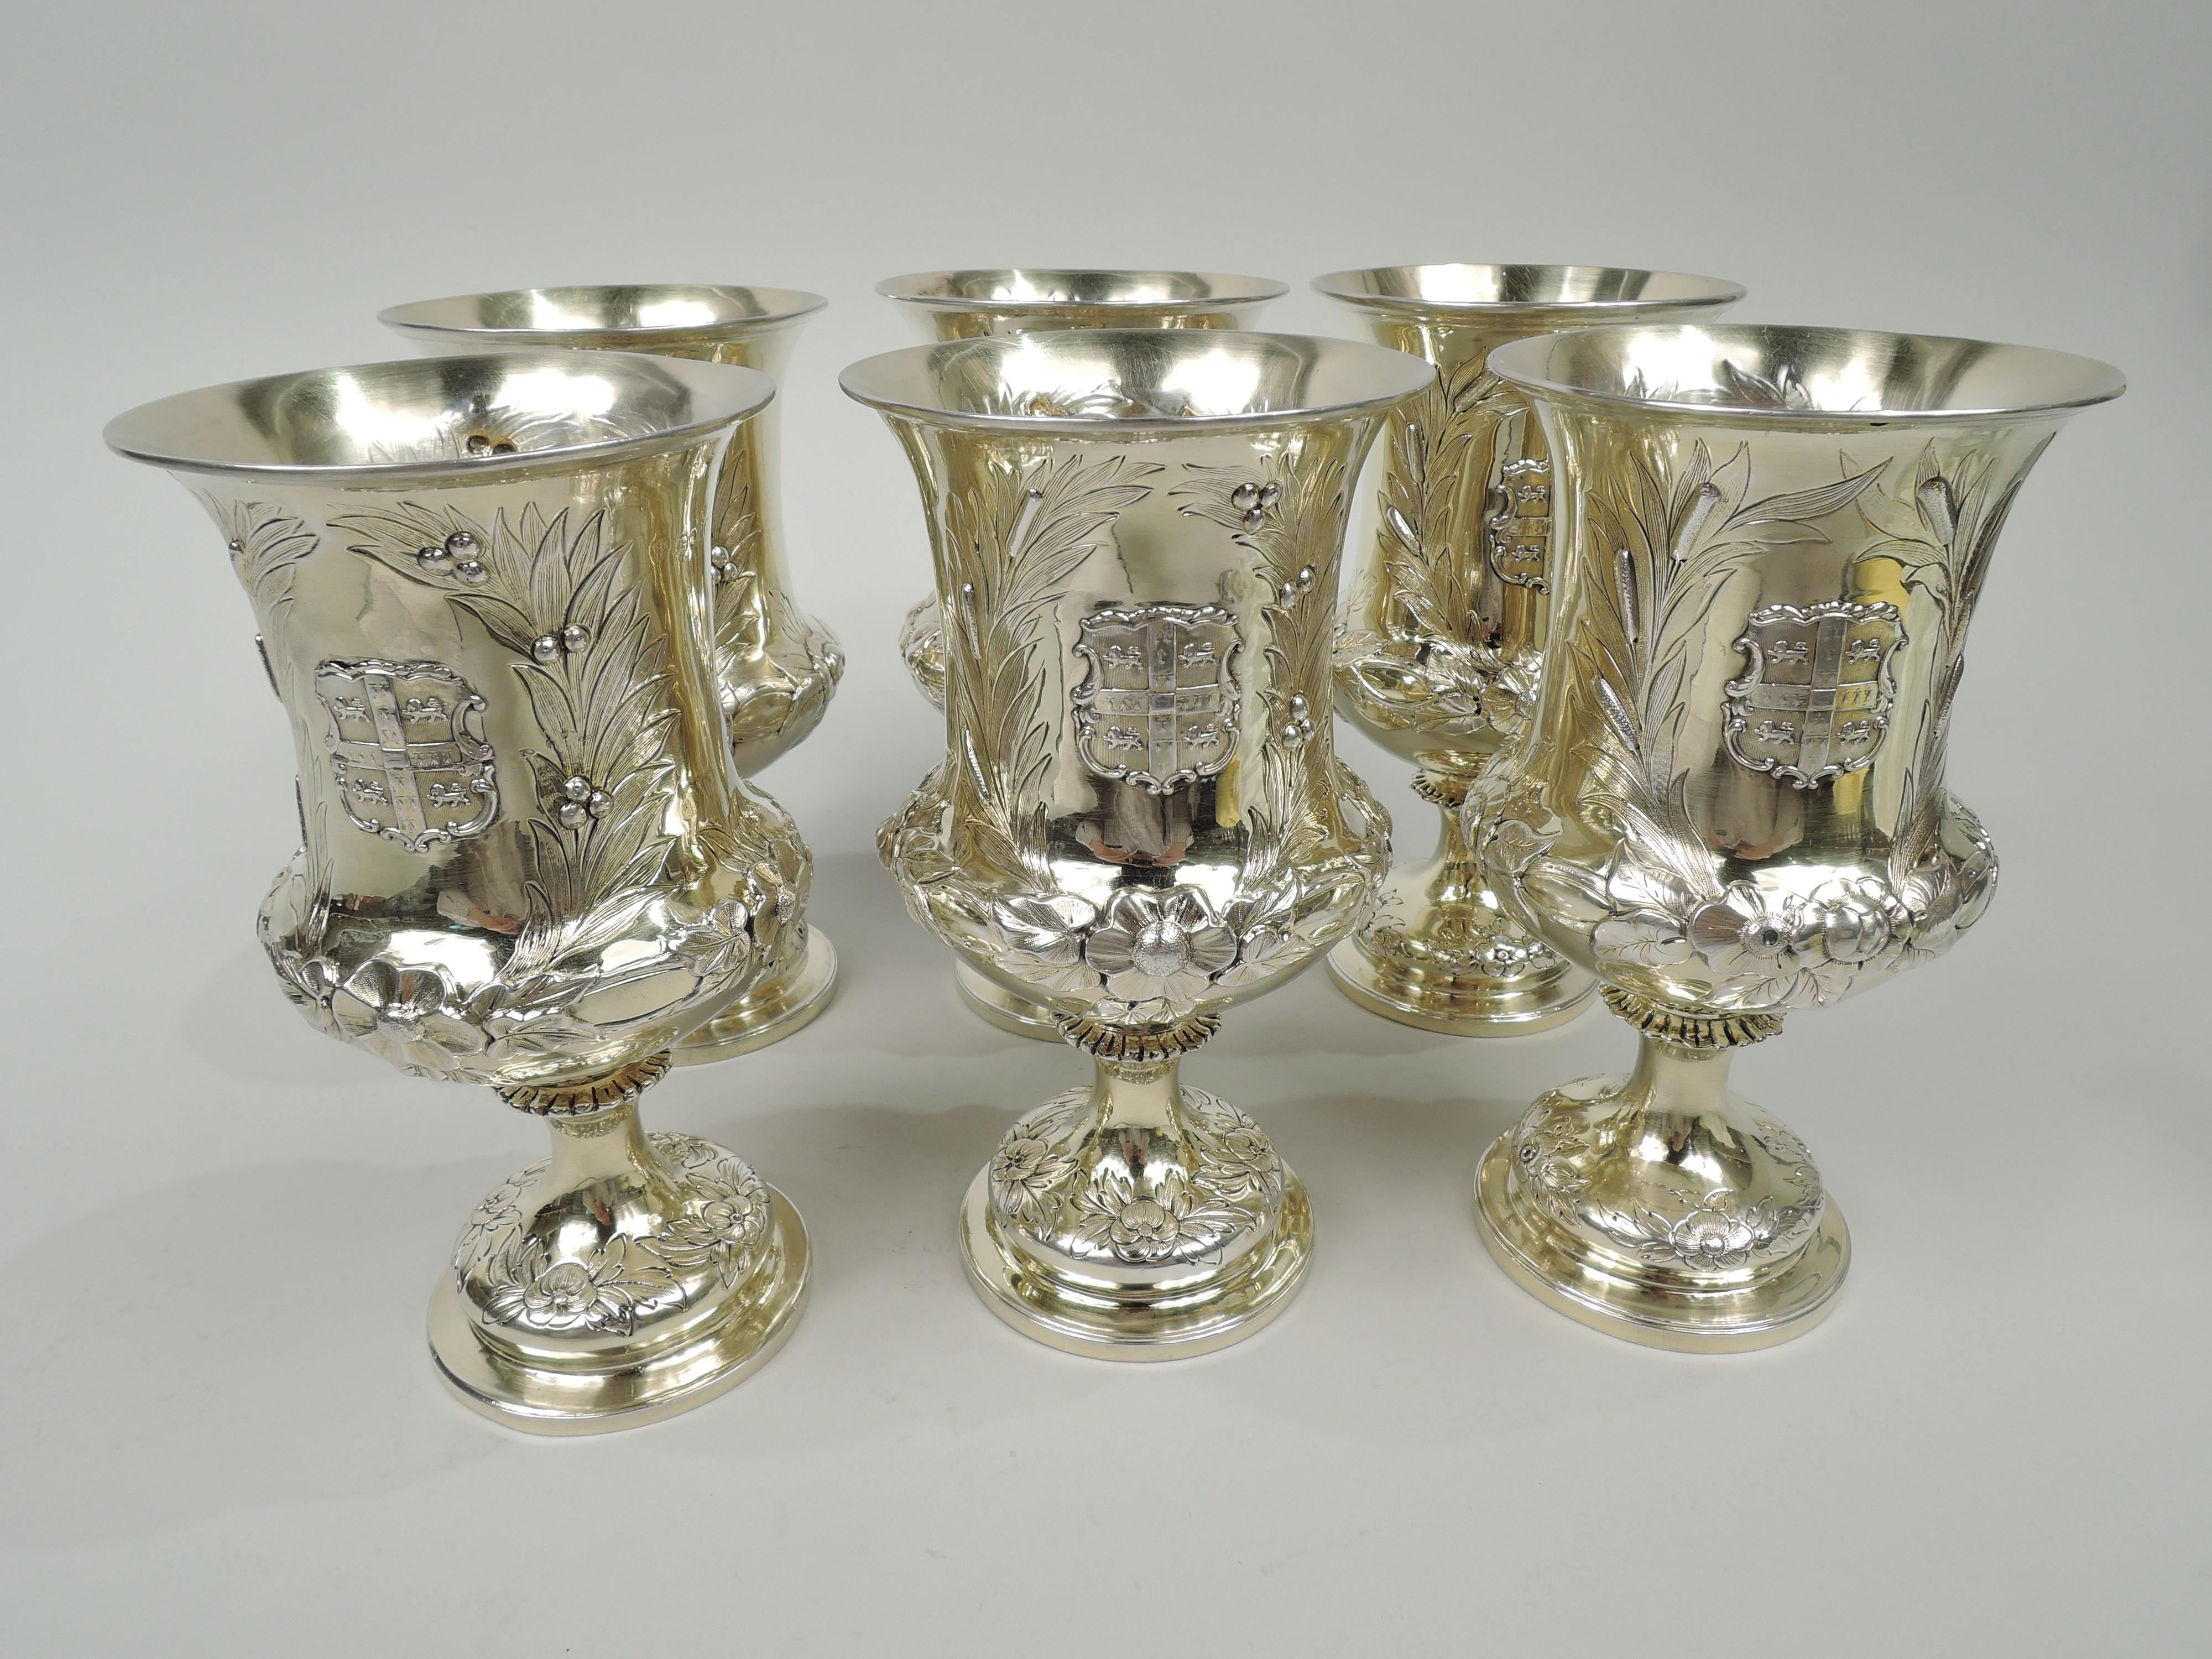 Set of 6 Victorian classical sterling silver goblets. Made by Charles Stuart Harris in London, 1884-9. Medici urn bowl with bellied bottom and flared rim. Spool shaft with flange flowing into raised foot. Chased and engraved garlands and two leaf